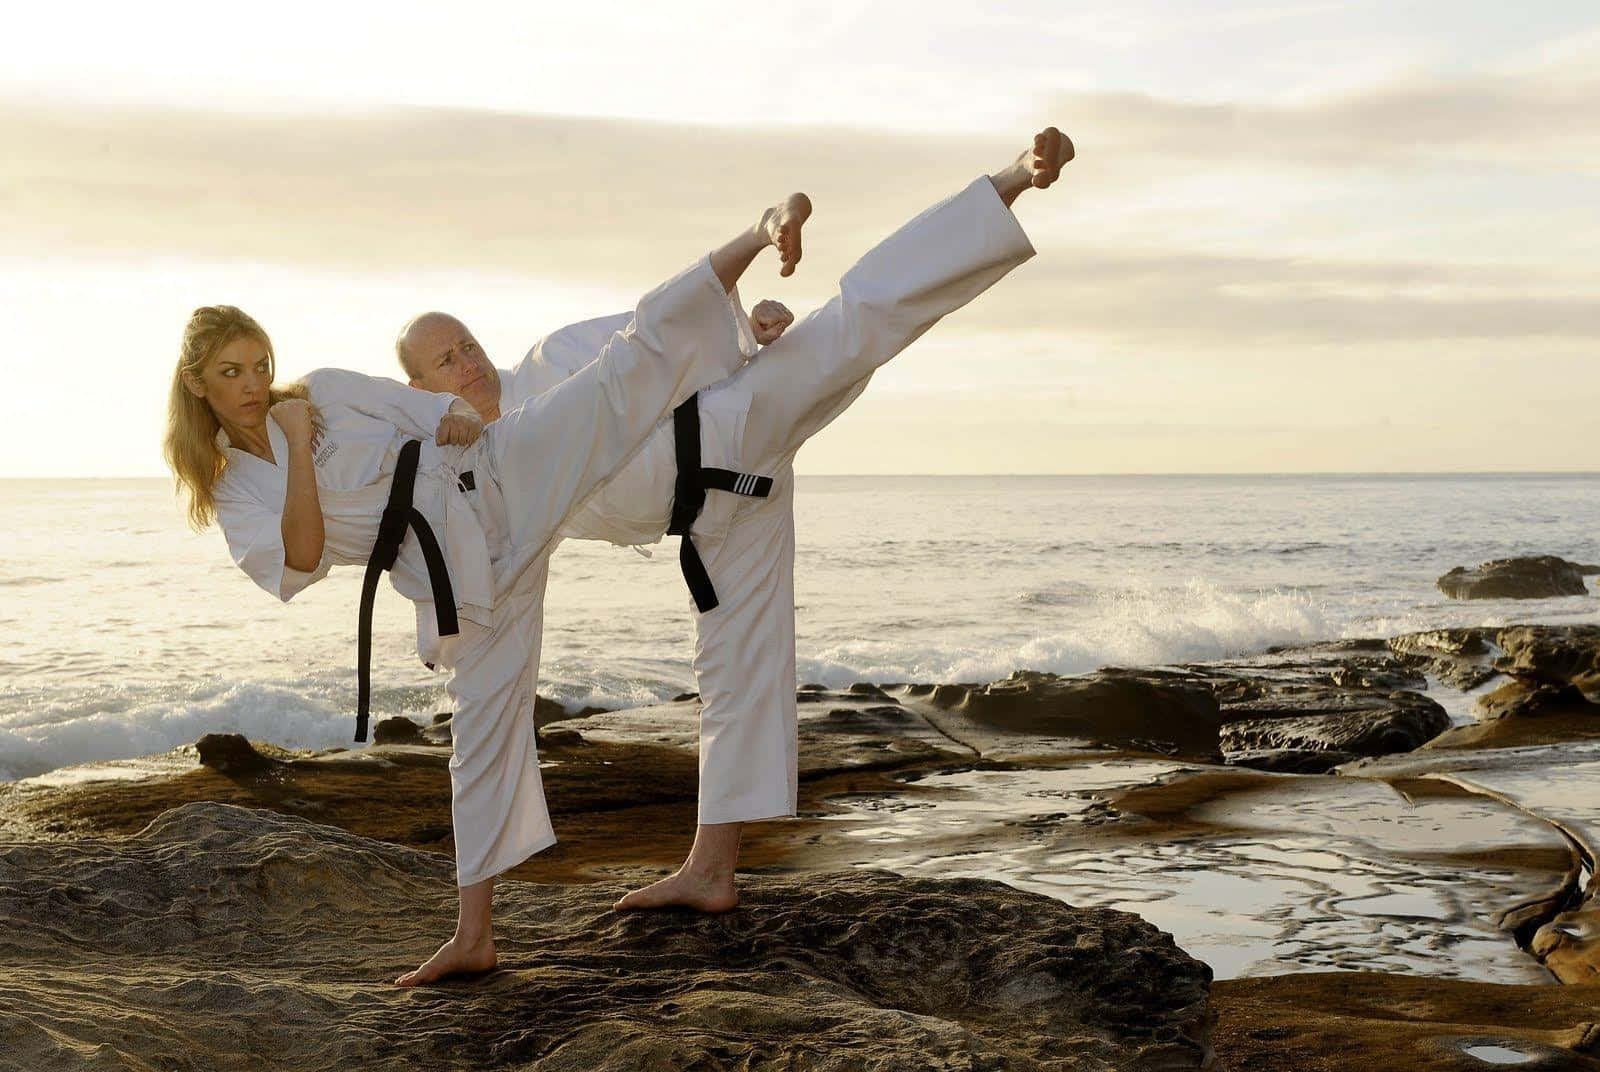 Caption: A martial artist demonstrating a perfect stance in their traditional uniform. Wallpaper